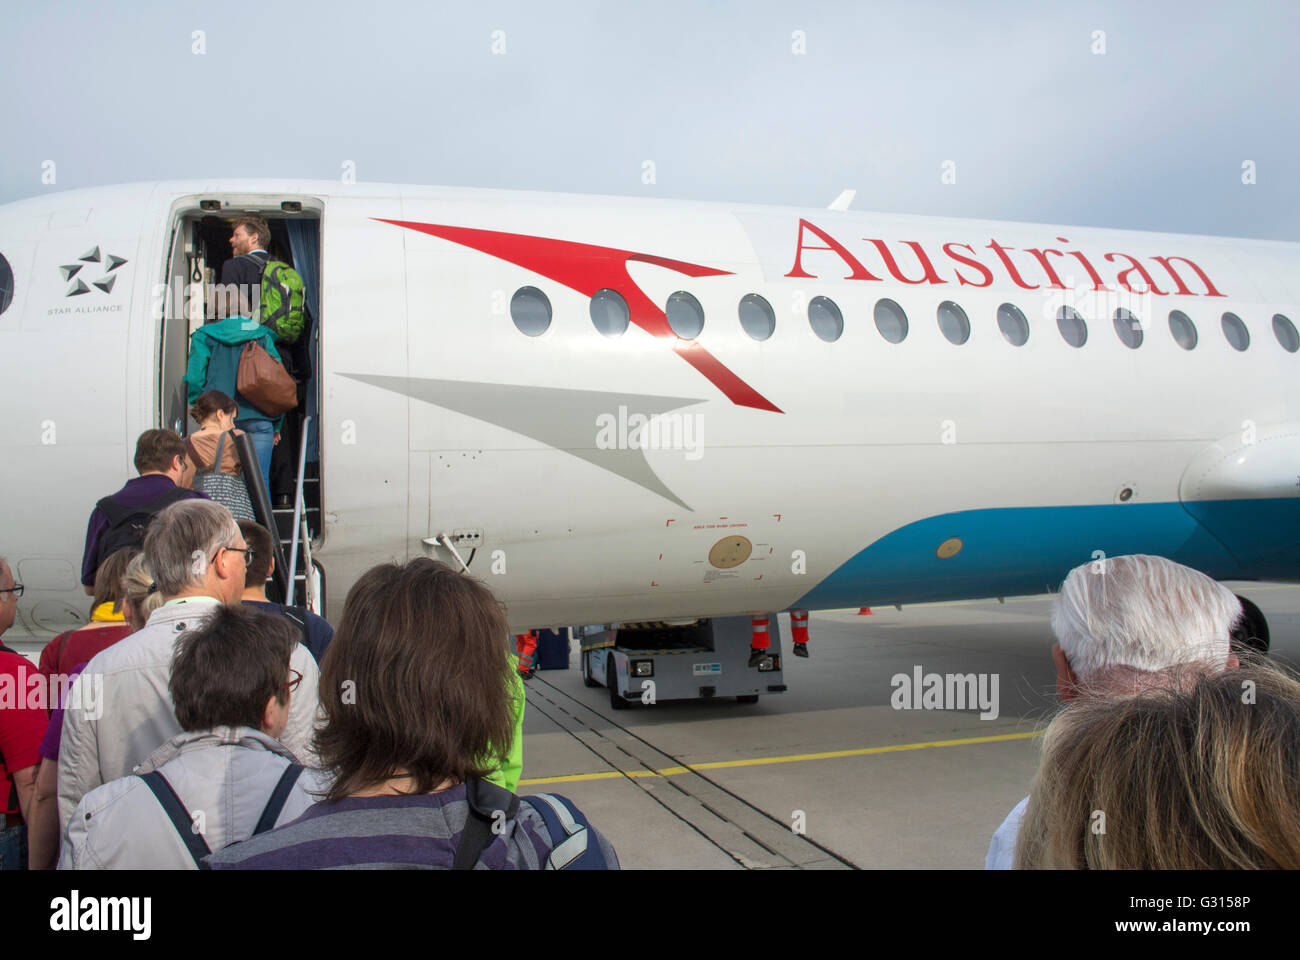 Boarding an airplane at Leipzig Airport, Germany. Stock Photo